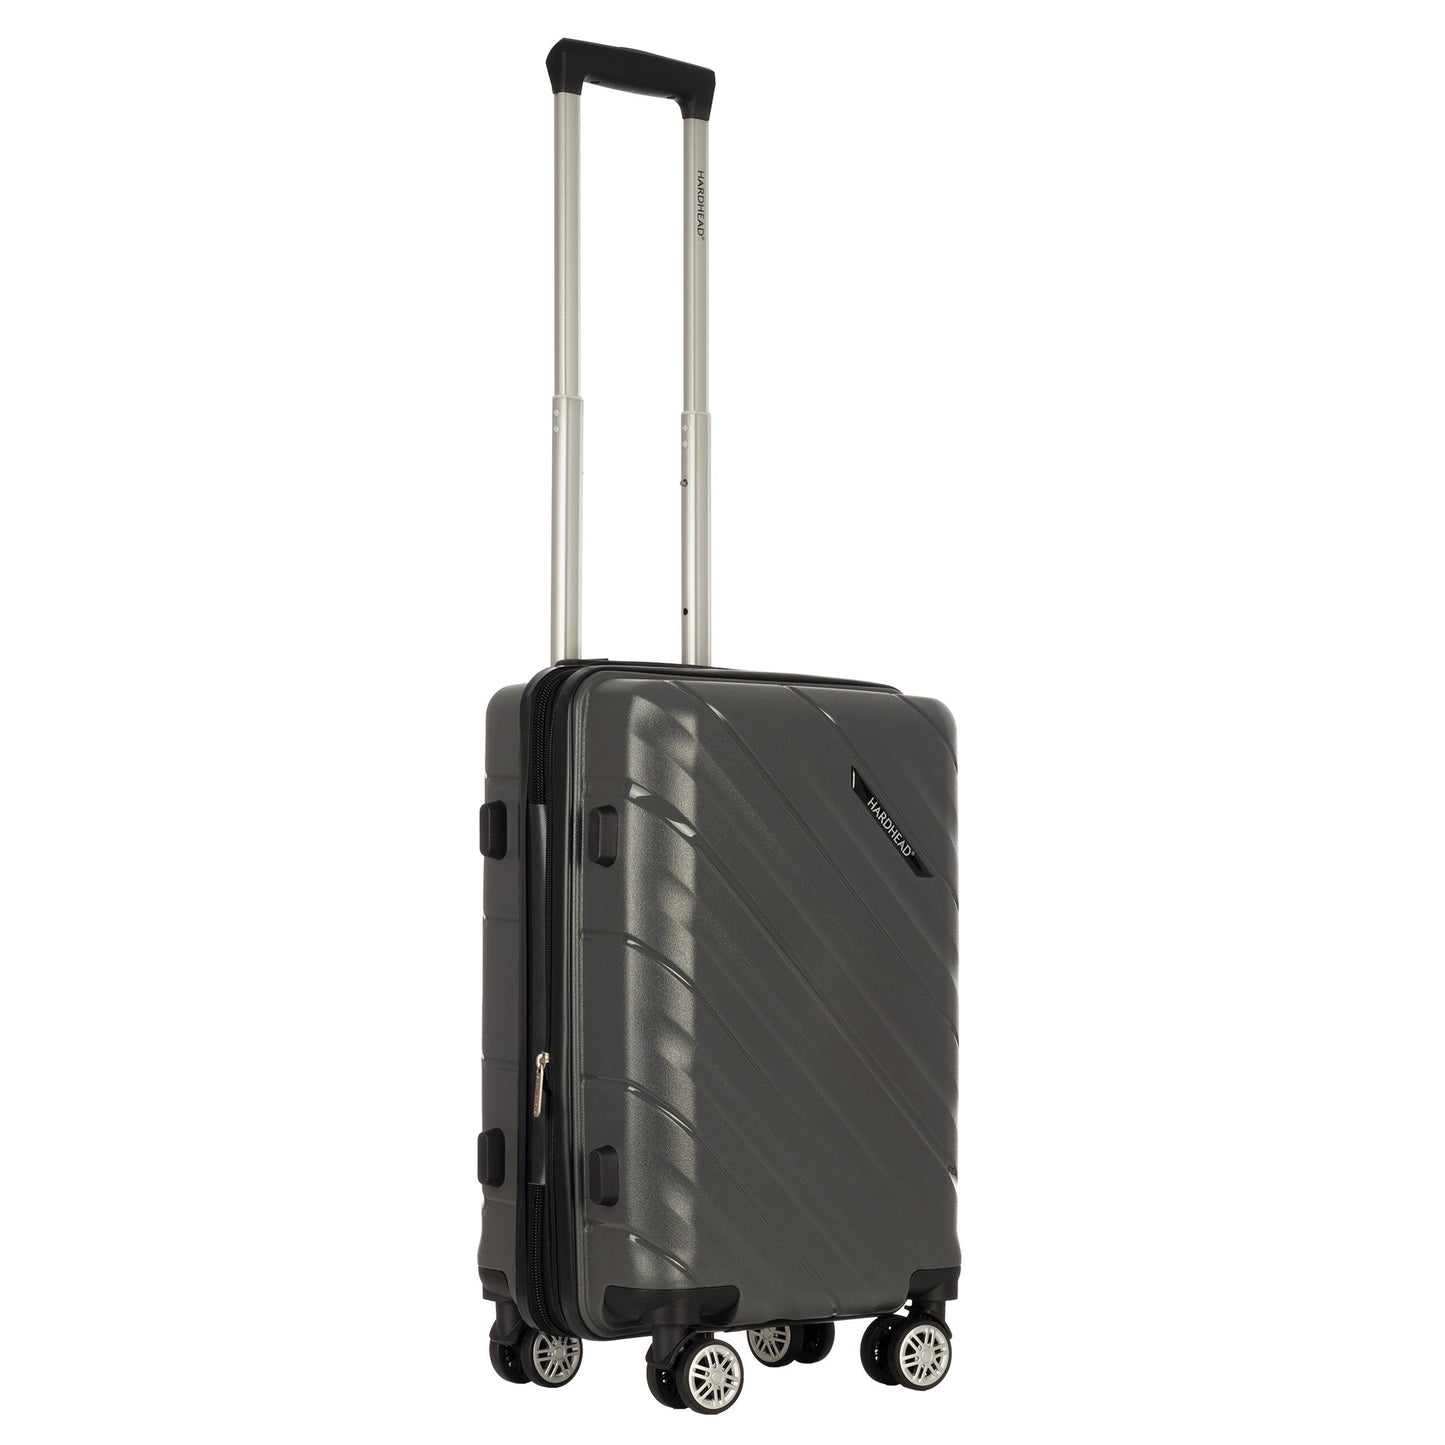 Ian collection luggage oxford (19") Suitcase Lock Spinner